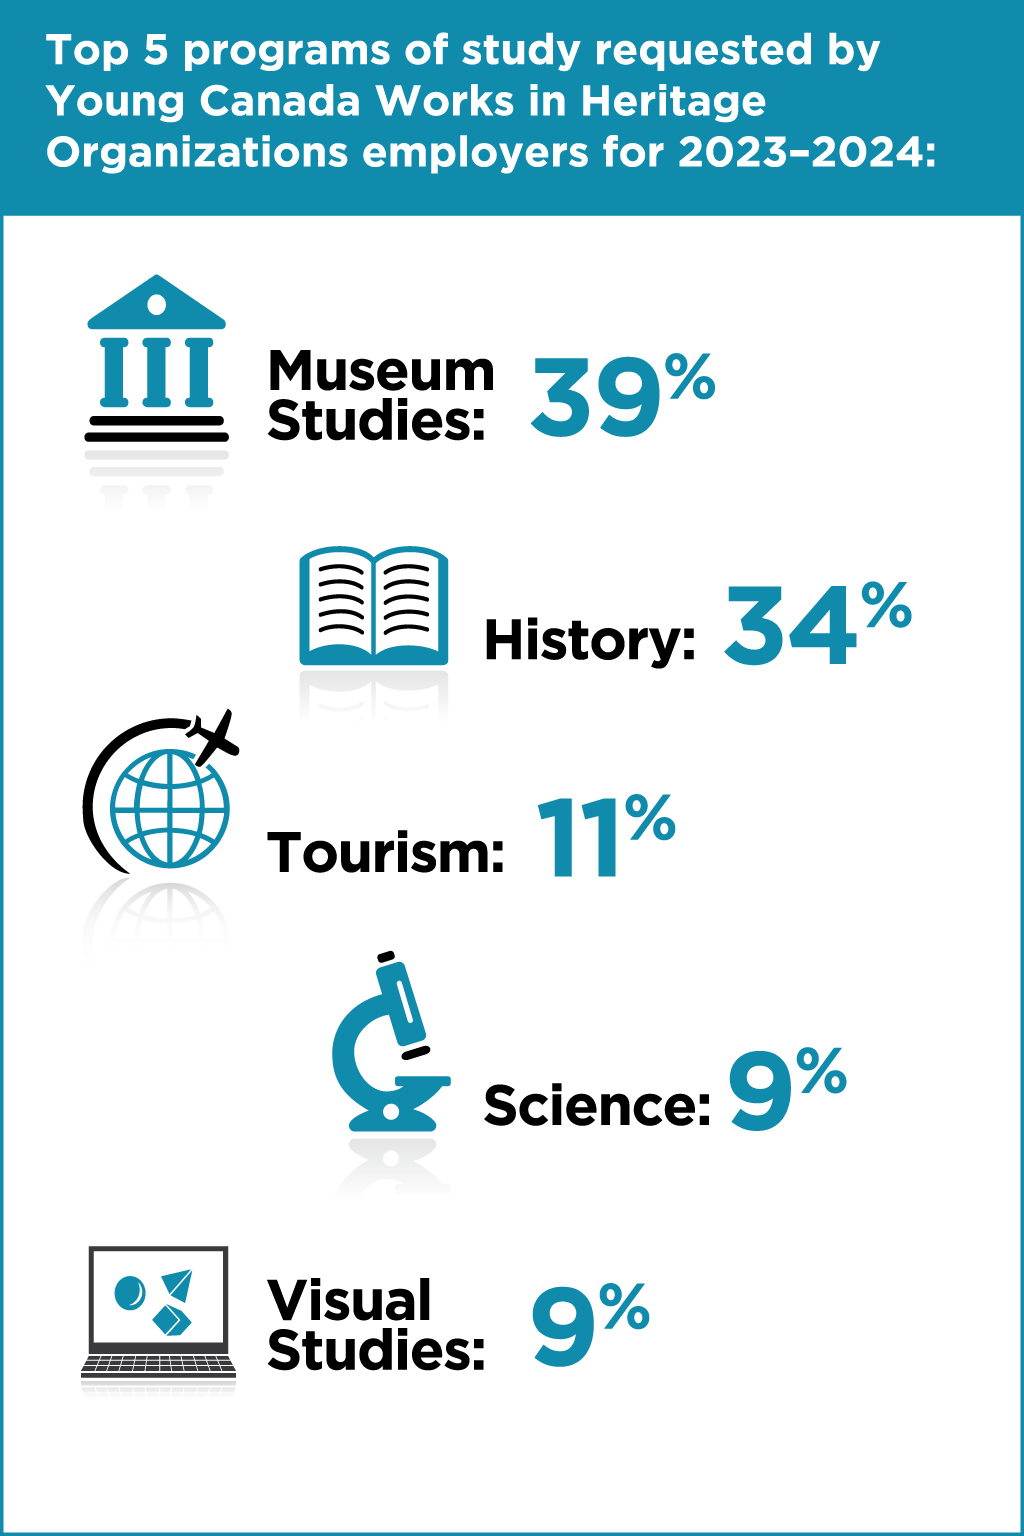 Top 5 programs of study requested by Young Canada Works in Heritage Organizations employers for 2023-2024